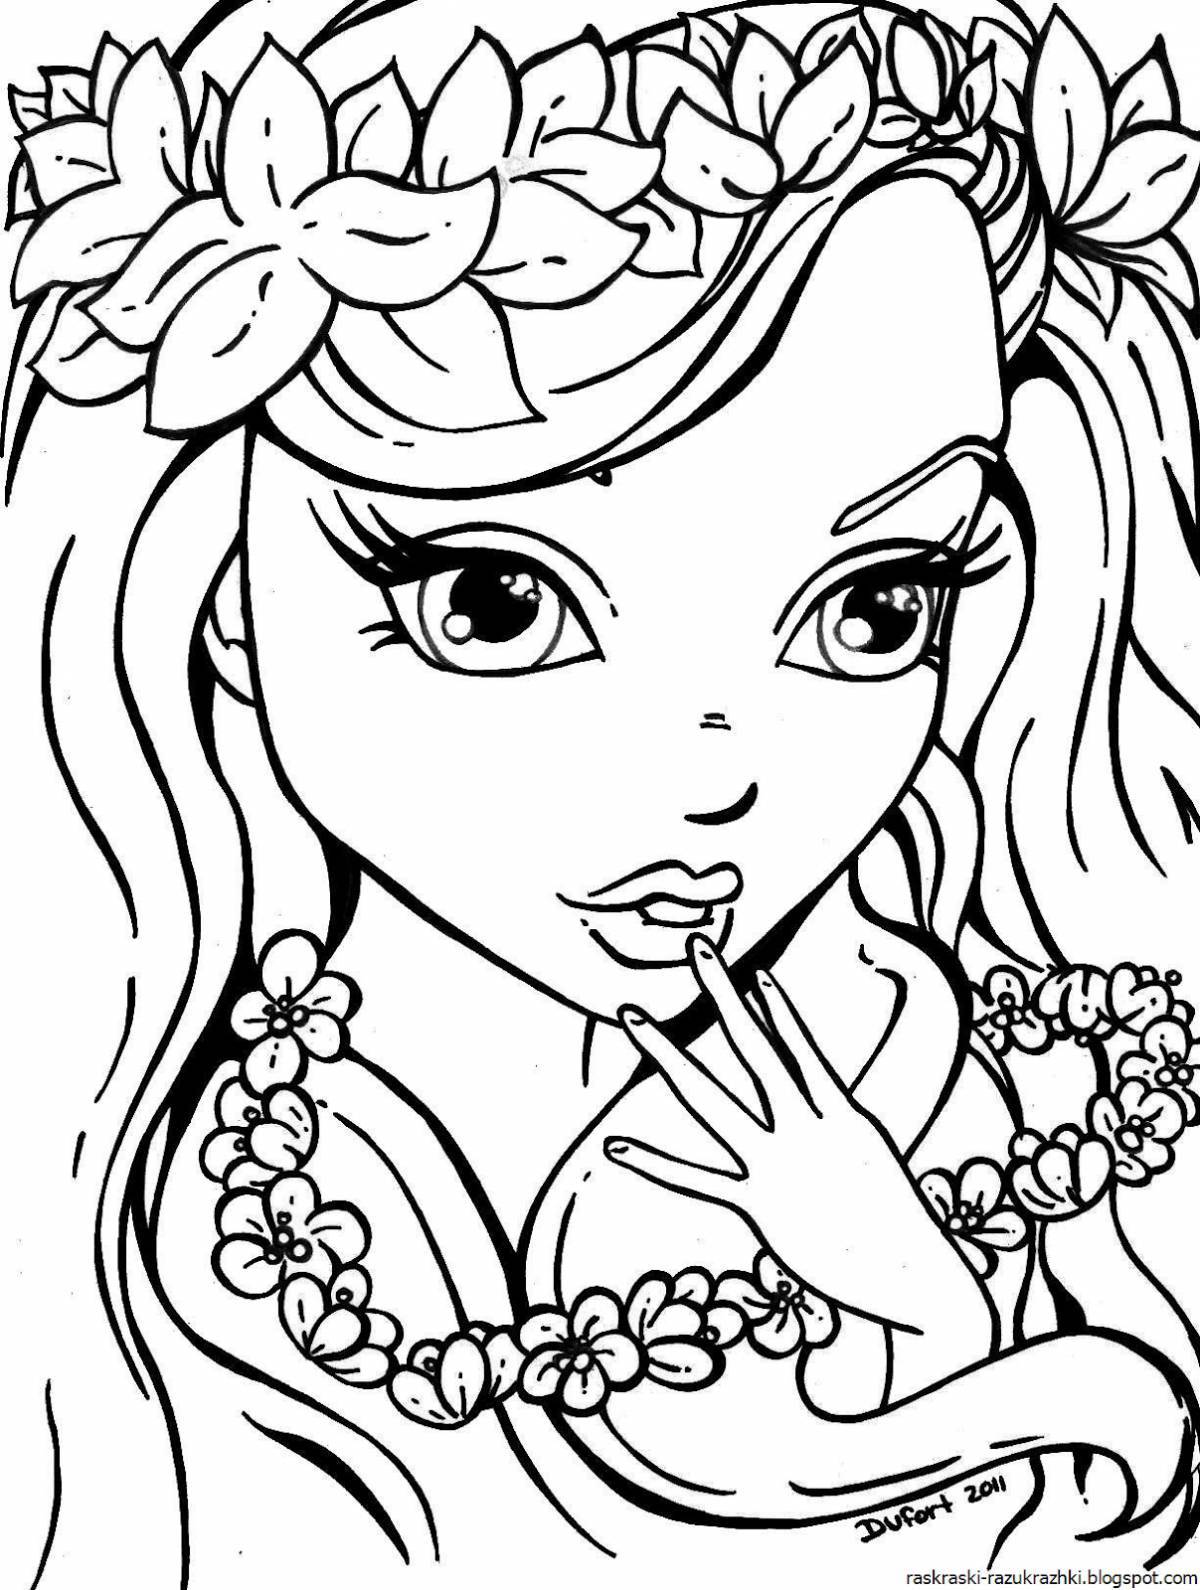 Crazy coloring book for girls 5-6 years old